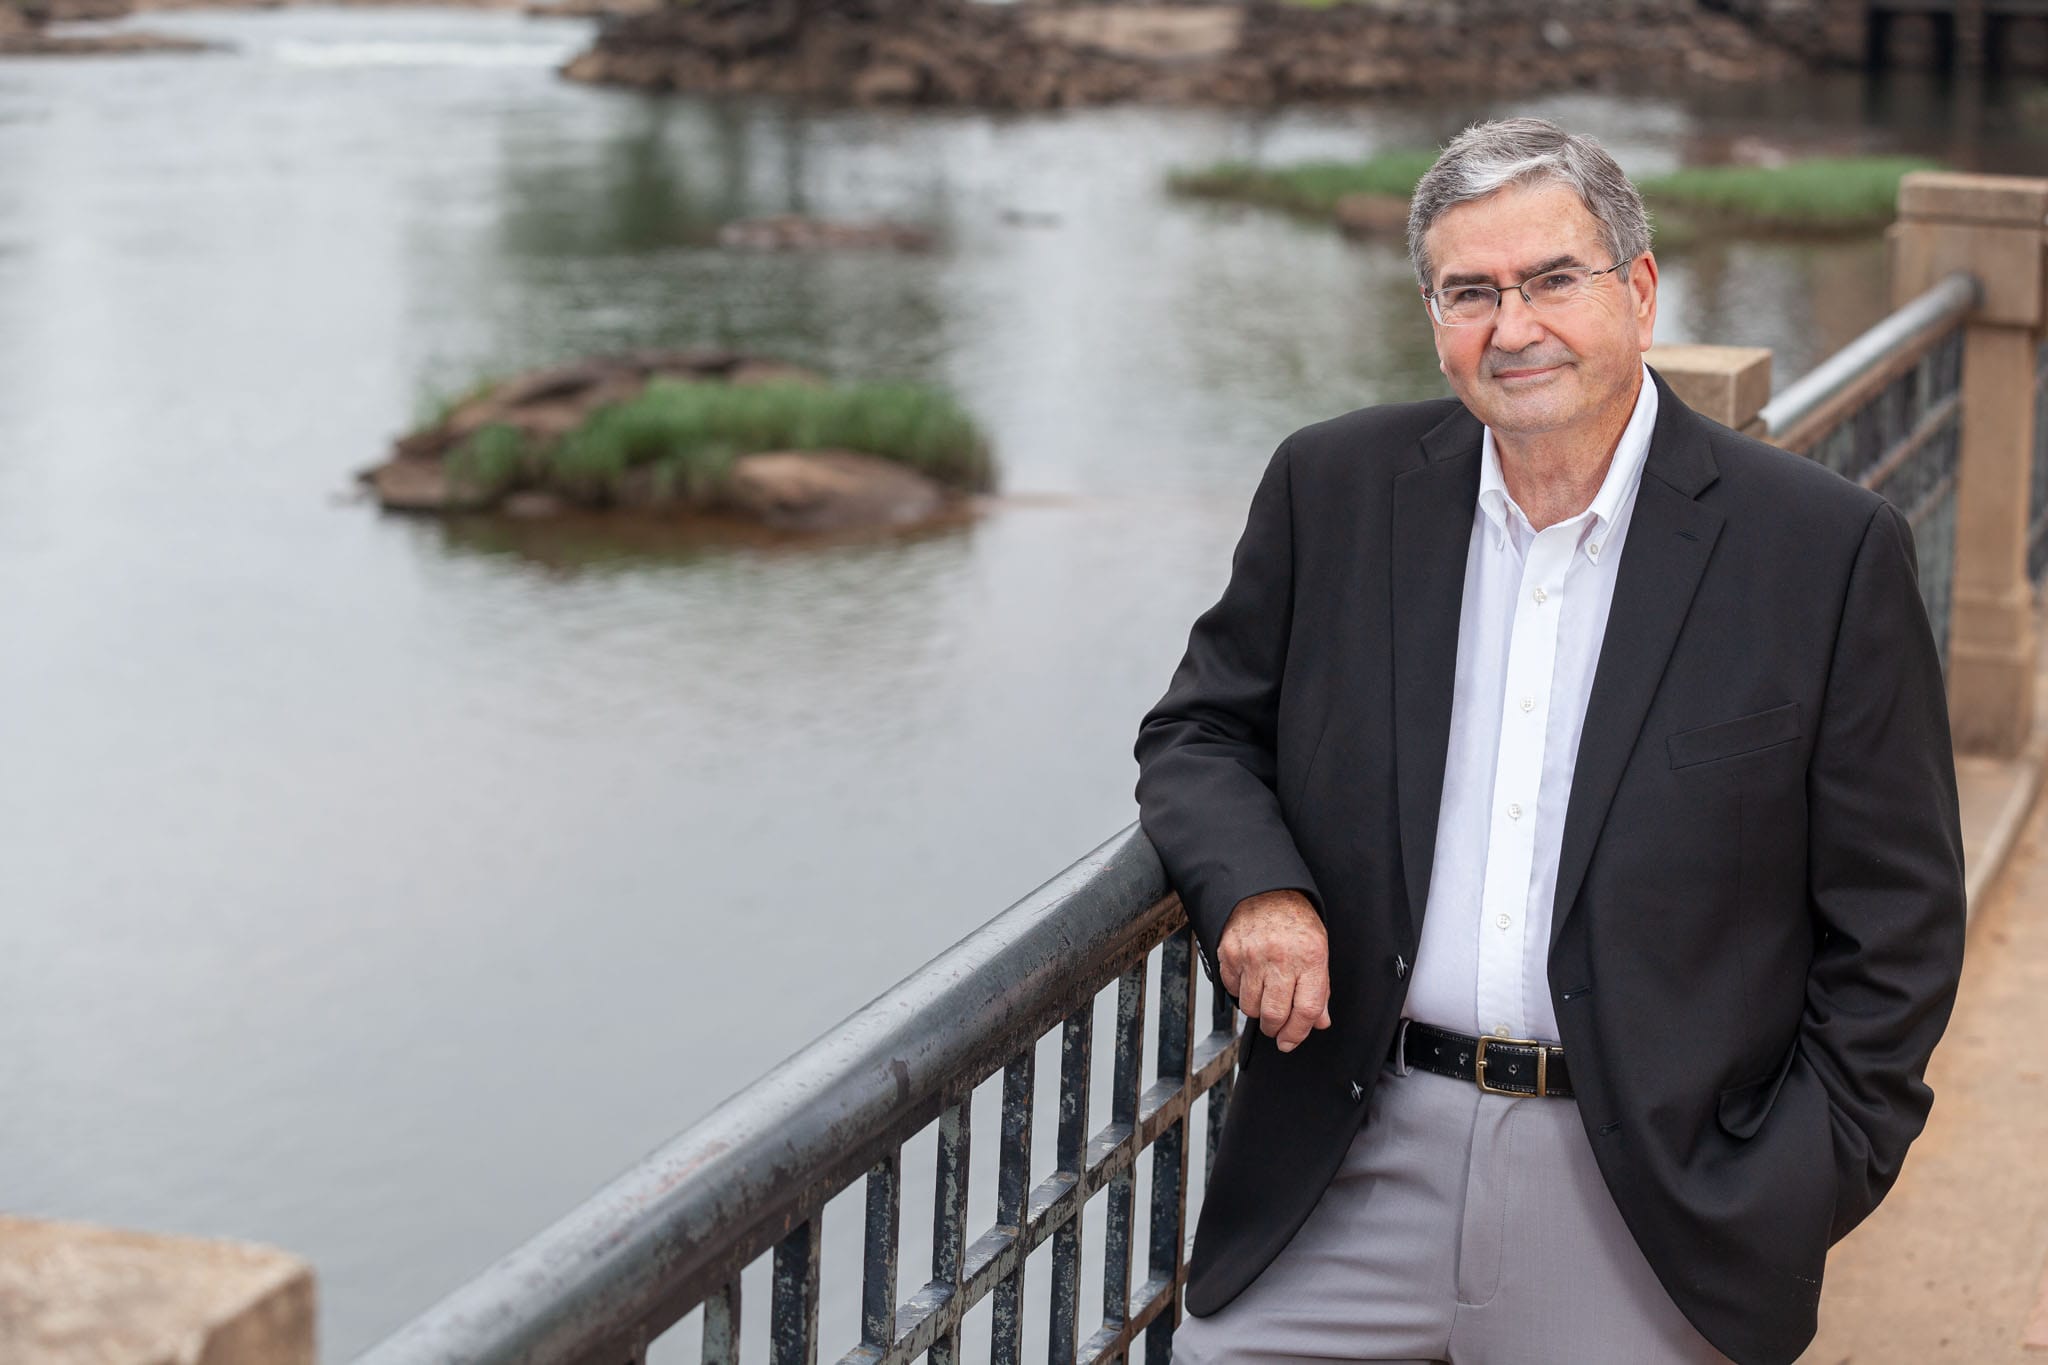 Georgia-Representative-Richard Smith-leaning-against-an-riverwalk-arm-rail-with-the-Chattahoochee-River-in-Columbus-Georgia-in-the-background